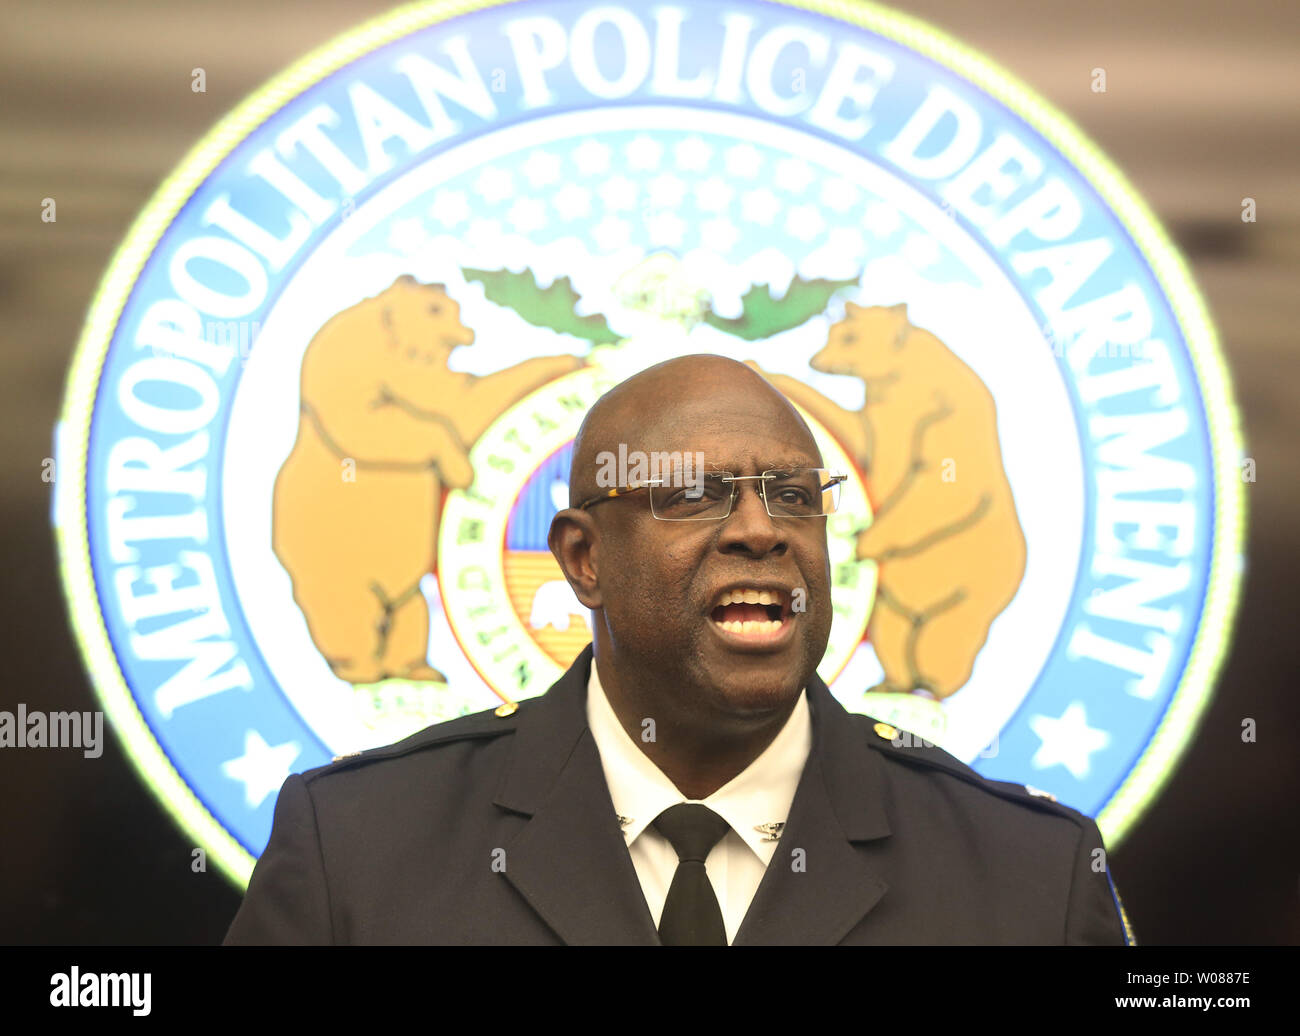 An angry St. Louis Metropolitian Police Chief John Hayden blasts St. Louis Circuit Attorney Kim Gardner about her comments in the recent shooting death of officer Katlyn Alix during a press conference in St. Louis on January 31, 2019. St. Louis Circuit Attorney Kim Gardner has brought multiple concerns to the media on how the department wrongly handled the initial investigation. Hayden said he called the press conference to clarify as much as he can surrounding the incident which occured on January 24, 2019, by a fellow St. Louis Police officer. Photo by Bill Greenblatt/UPI Stock Photo